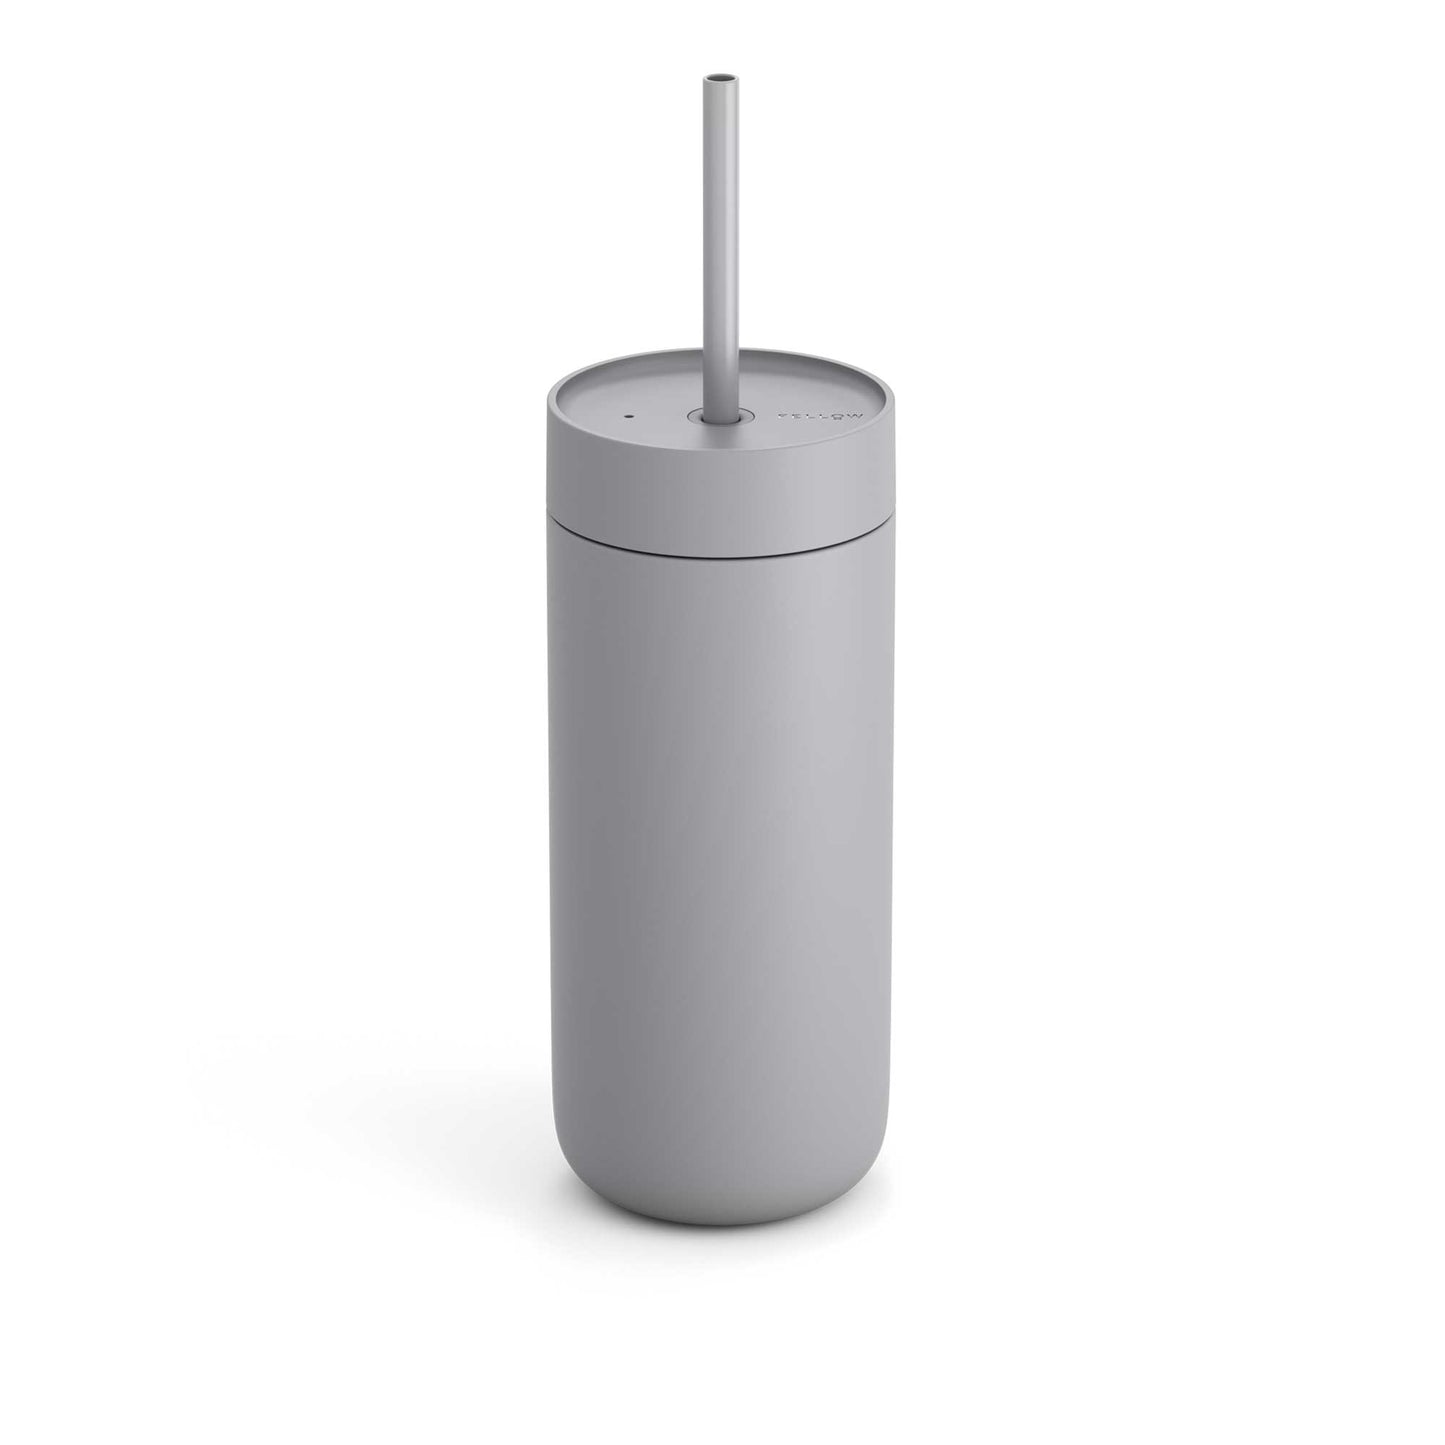 Stainless steel and BPA-free plastic thermal tumbler with Tritan straw